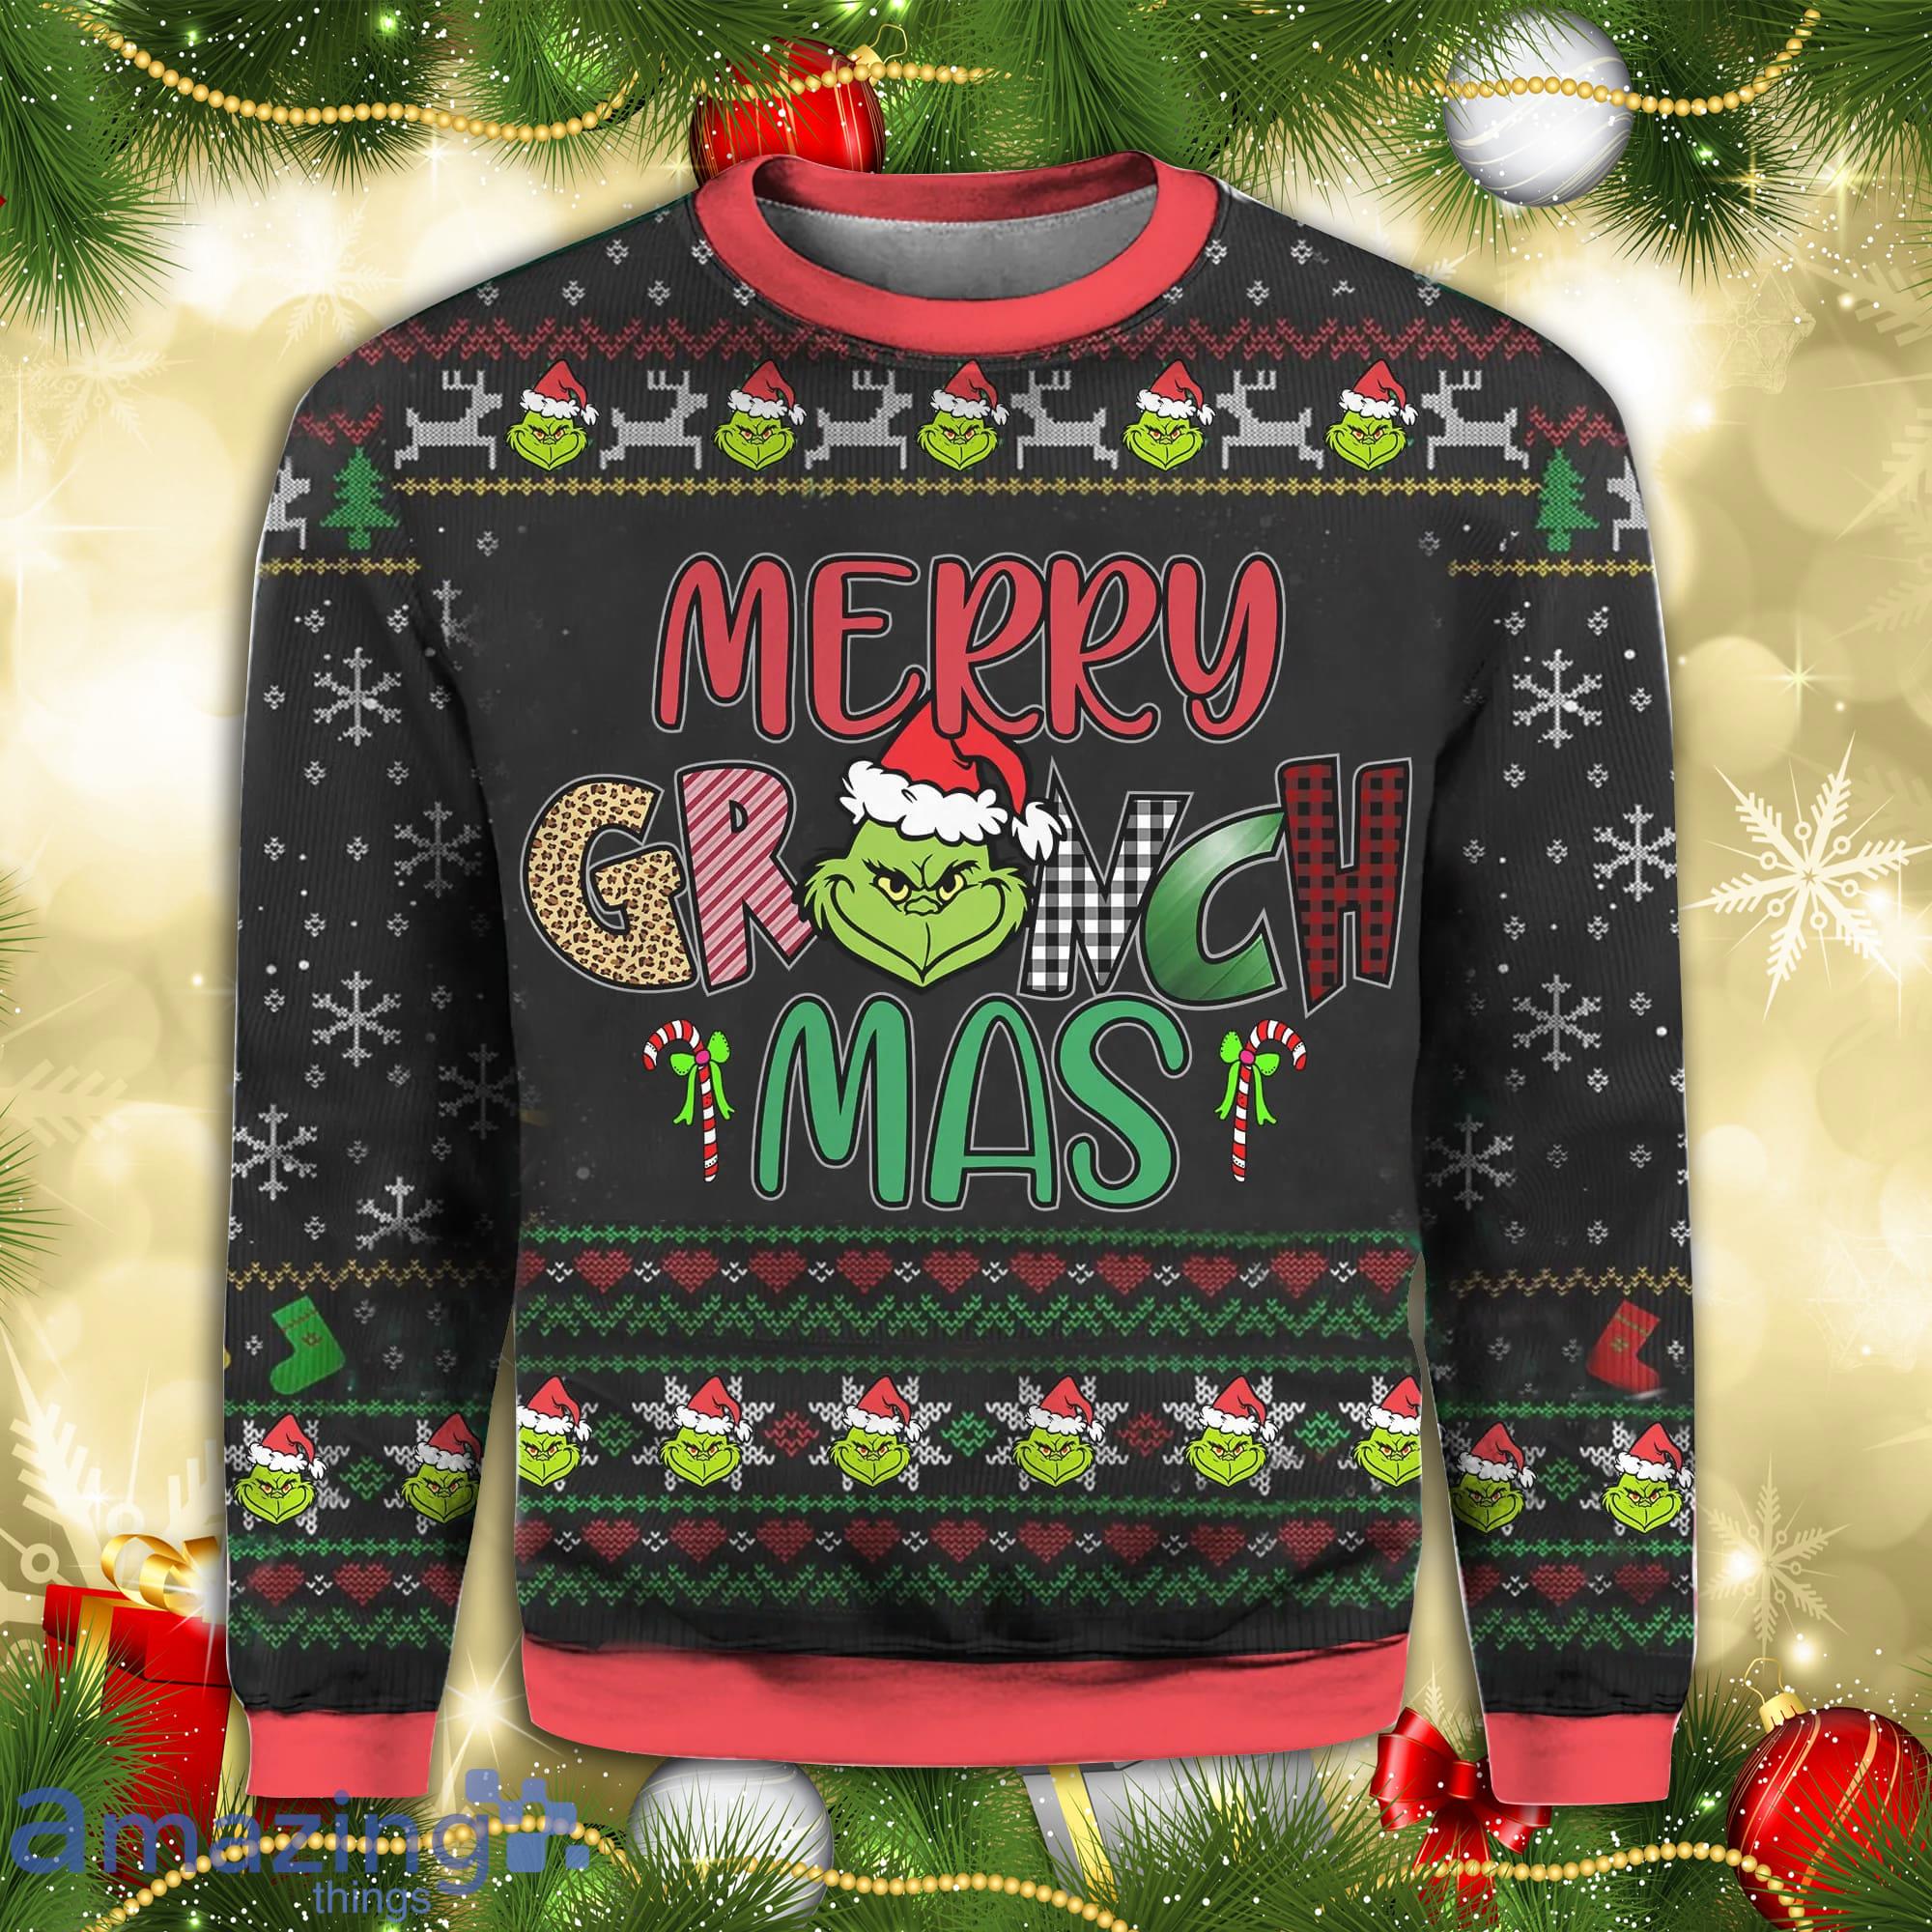 Merry Grinch Mas Knitting Pattern Christmas Ugly Sweater Product Photo 1